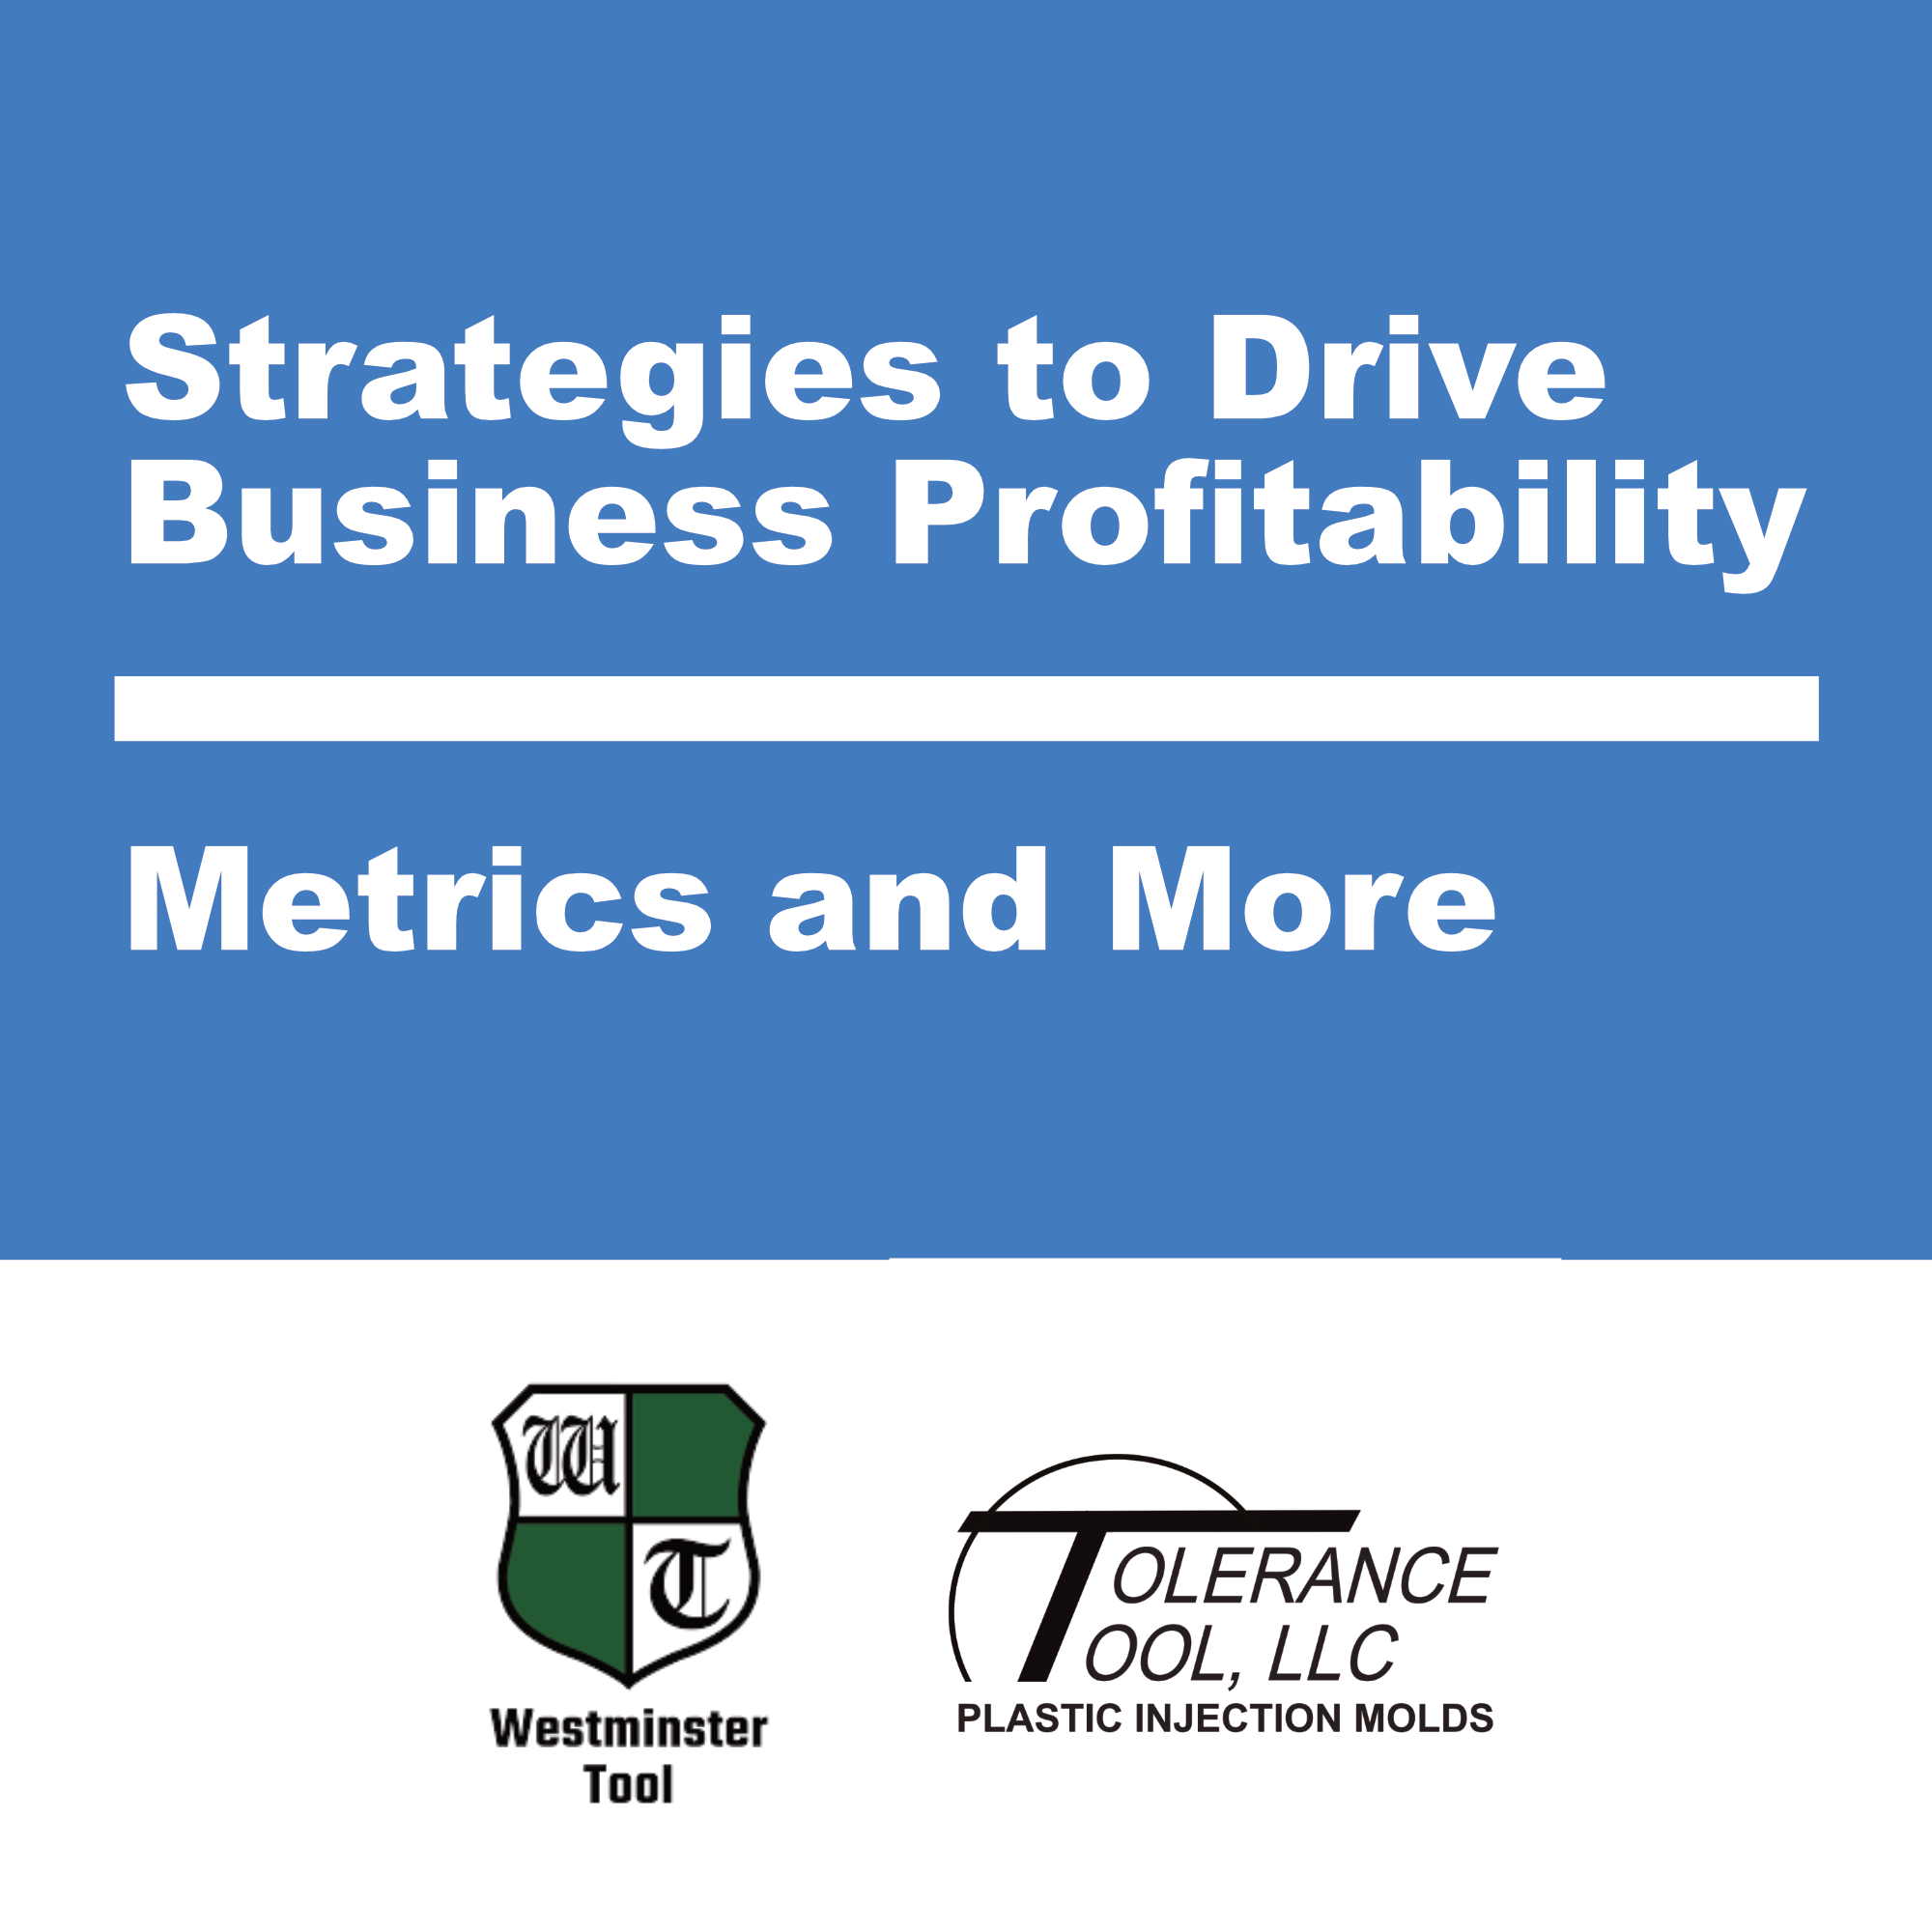 Strategies to Drive Business Profitability: Metrics and More